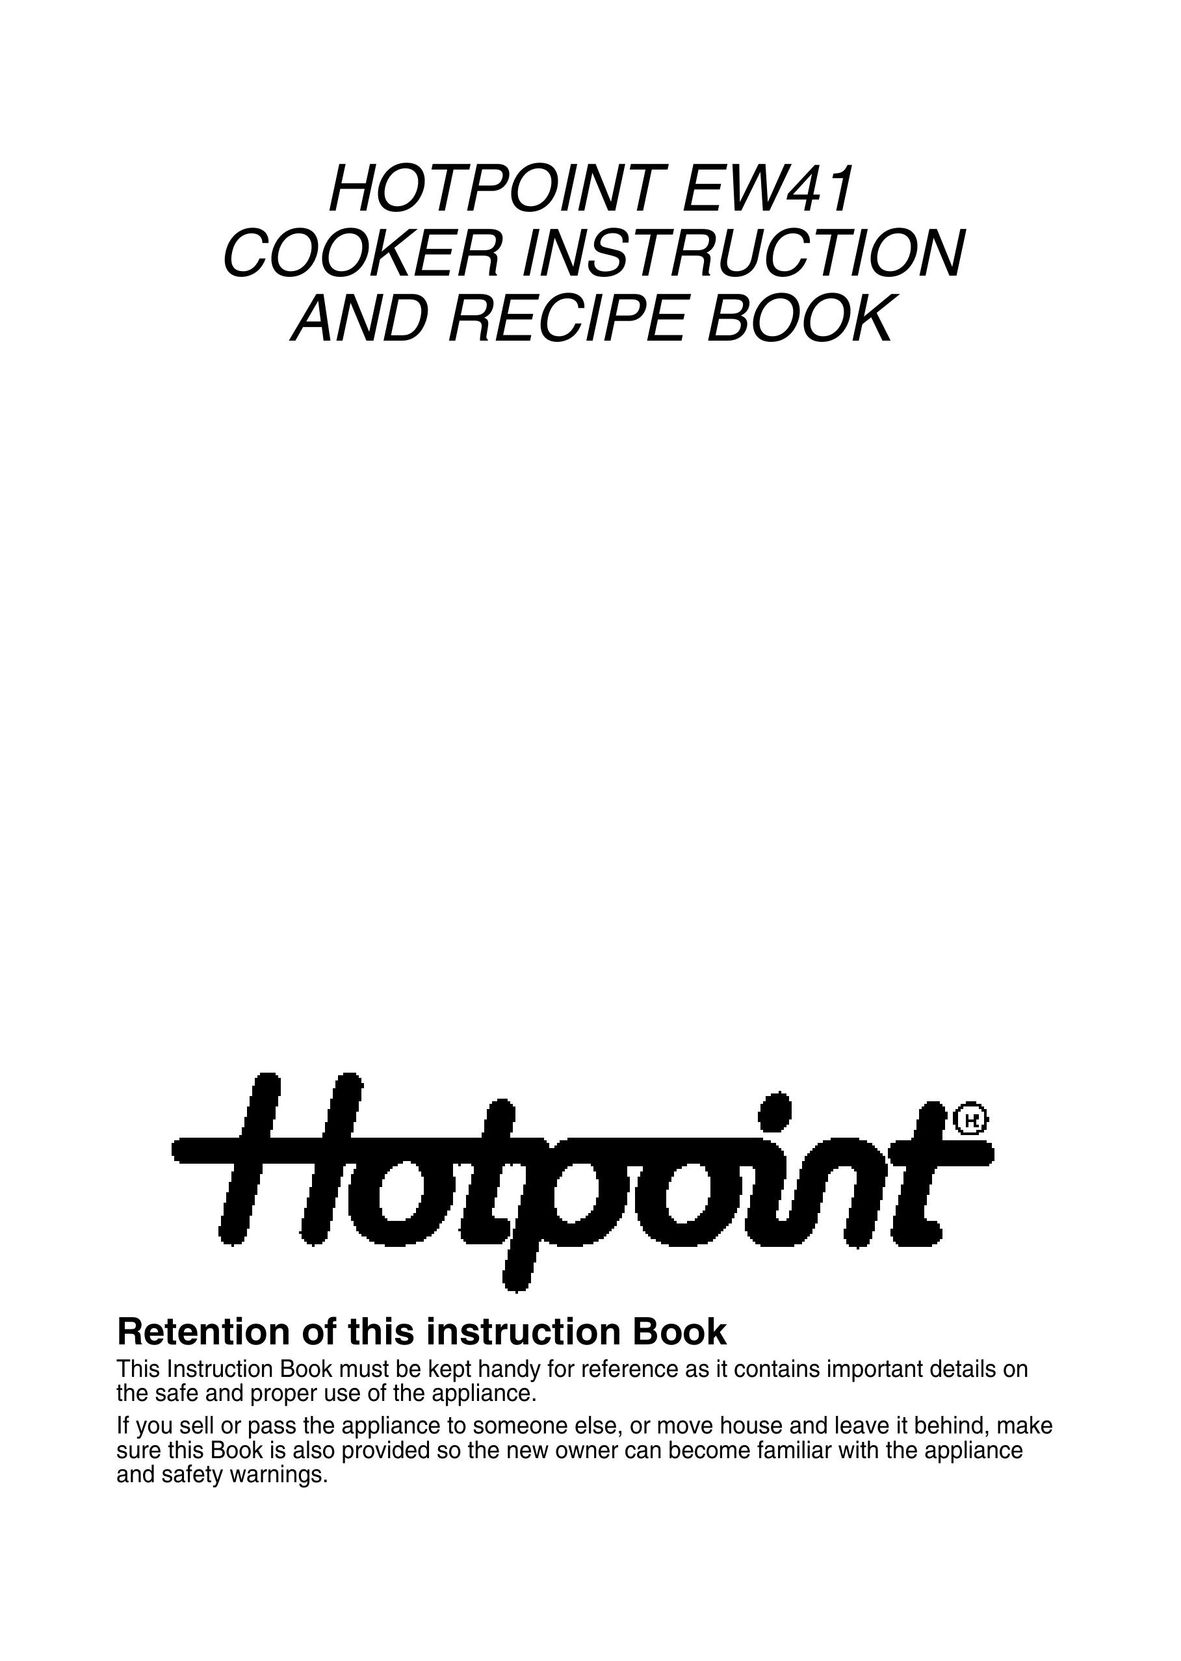 Hotpoint EW41 Electric Pressure Cooker User Manual